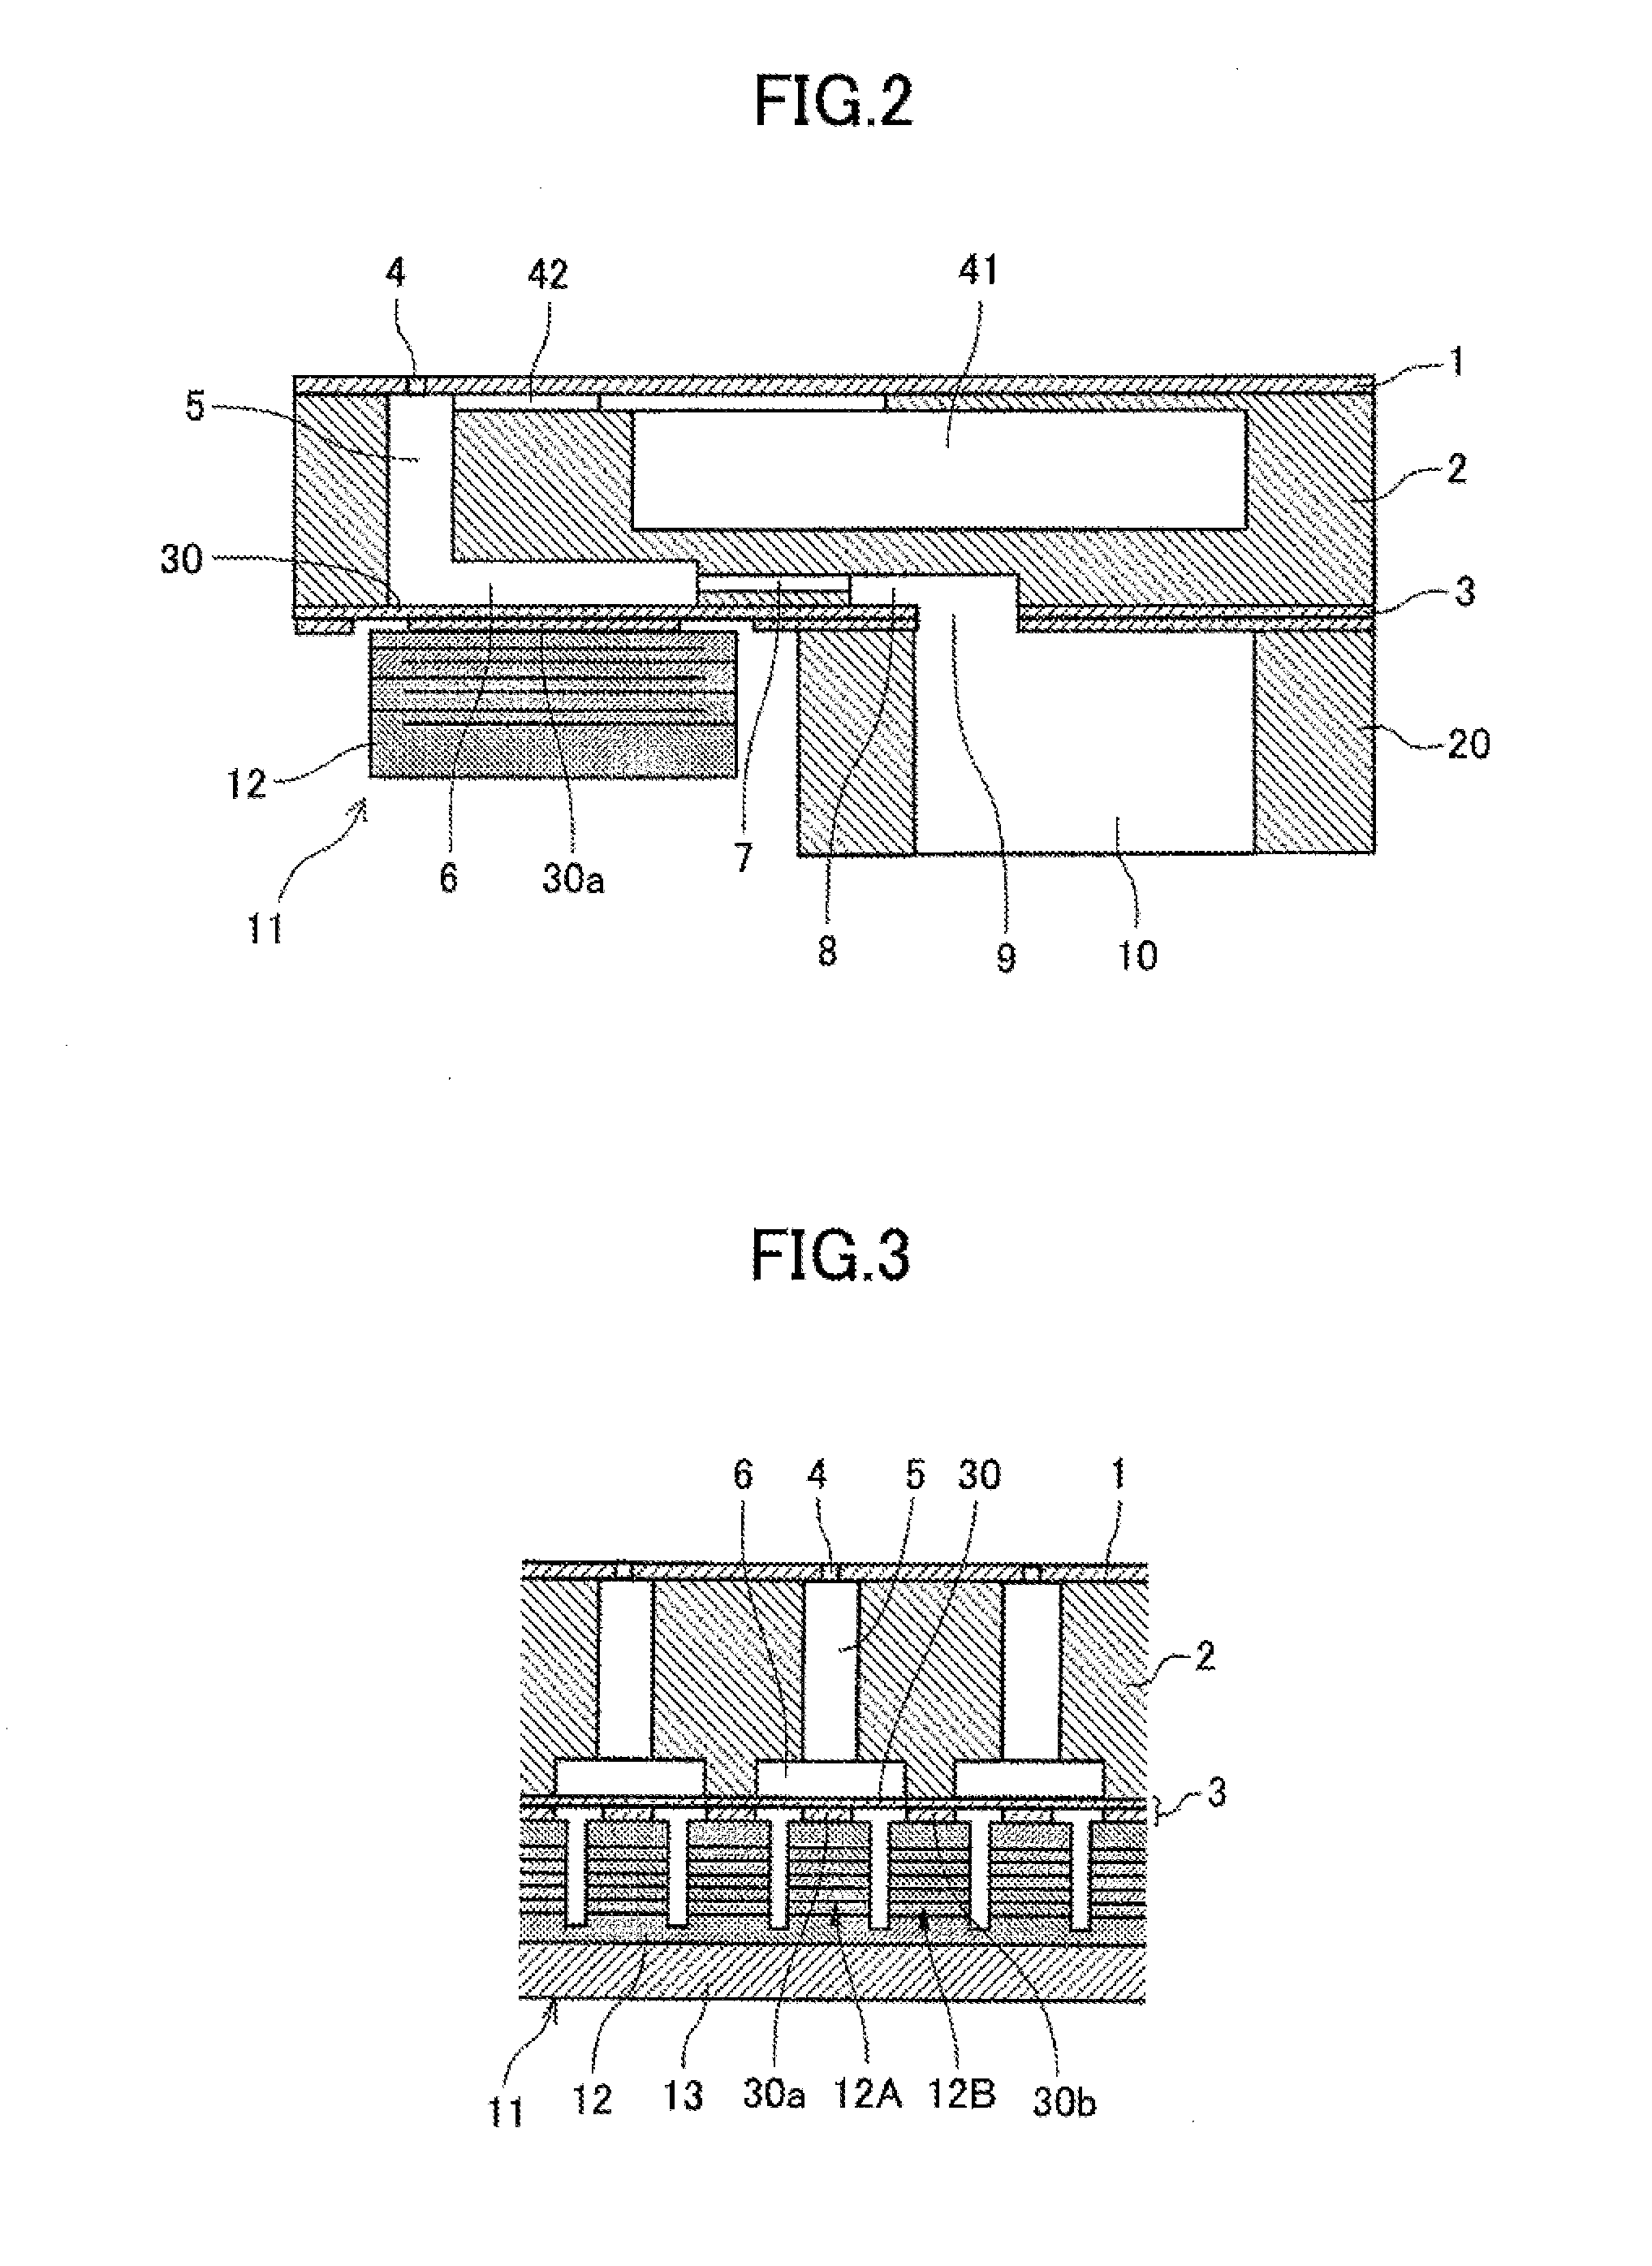 Liquid ejection head, liquid ejection unit, and apparatus for ejecting liquid